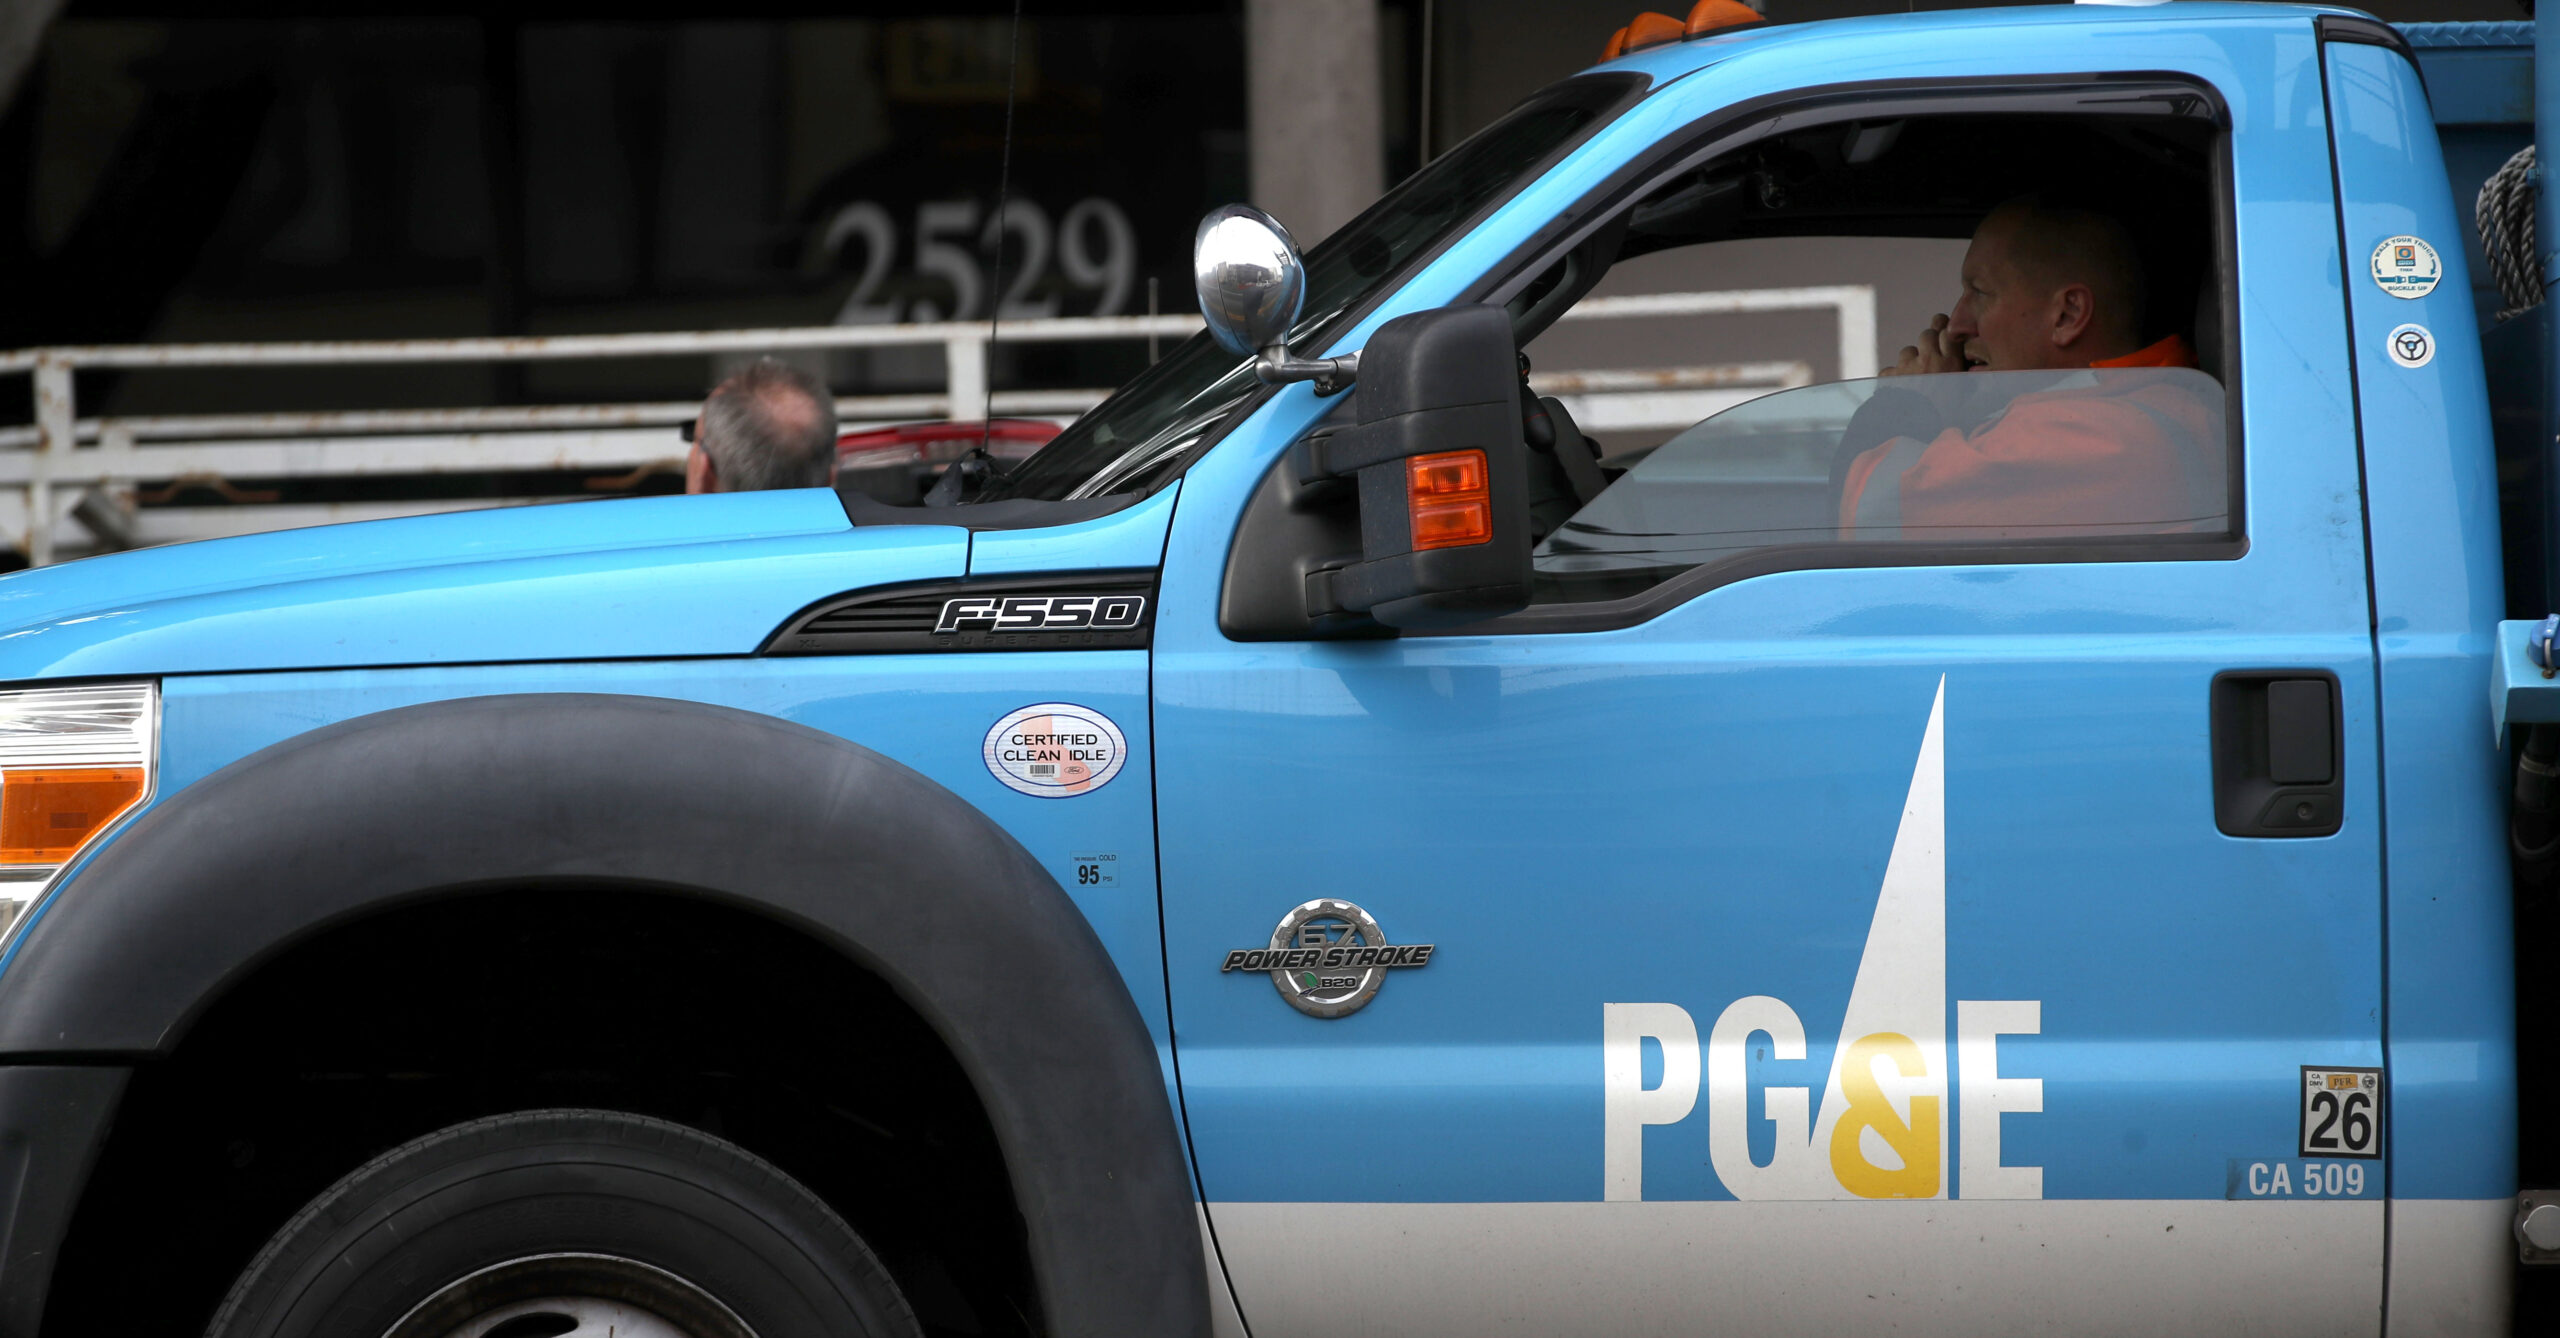 A Pacific Gas &amp; Electric (PG&amp;E) truck on January 17, 2019 in San Francisco, Calif. | Justin Sullivan/Getty Images